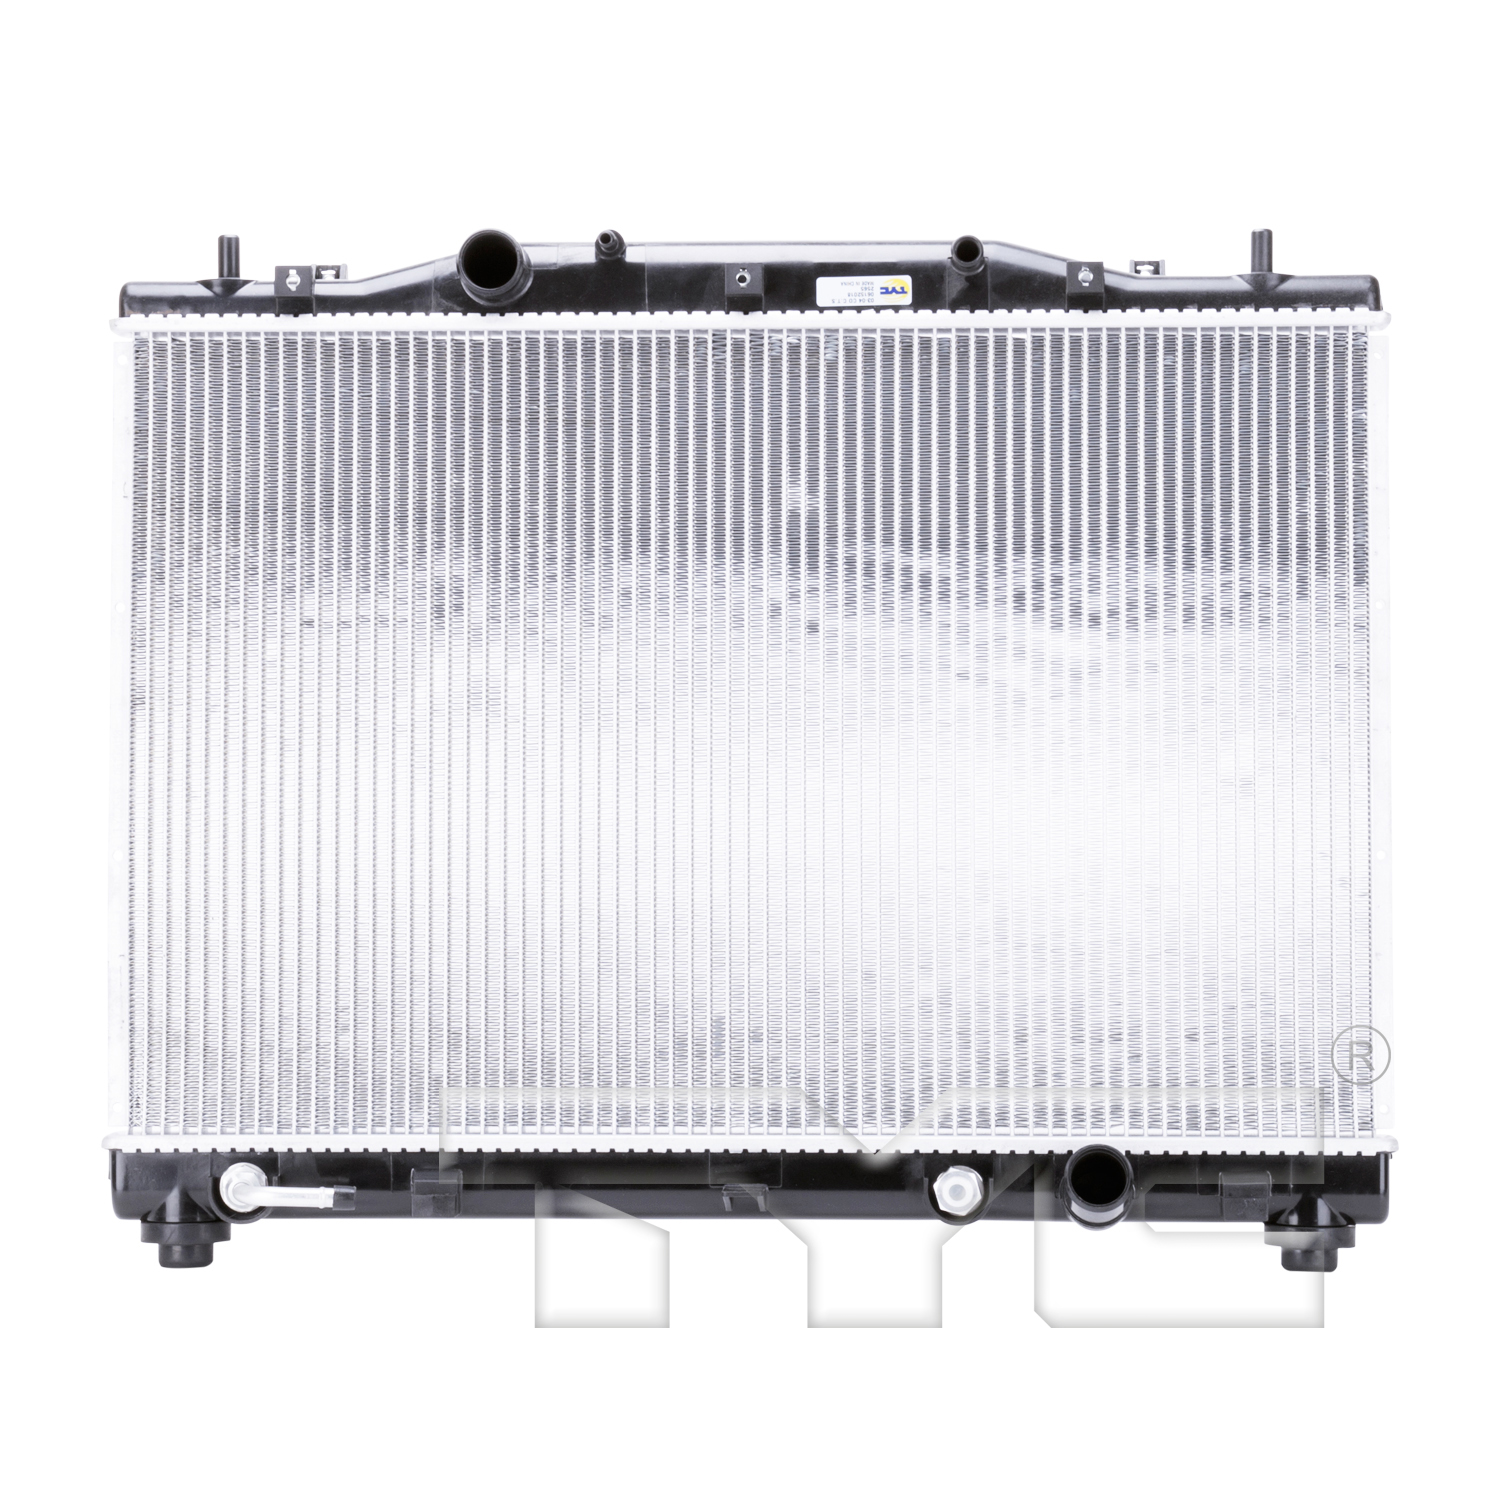 Aftermarket RADIATORS for CADILLAC - CTS, CTS,03-07,Radiator assembly